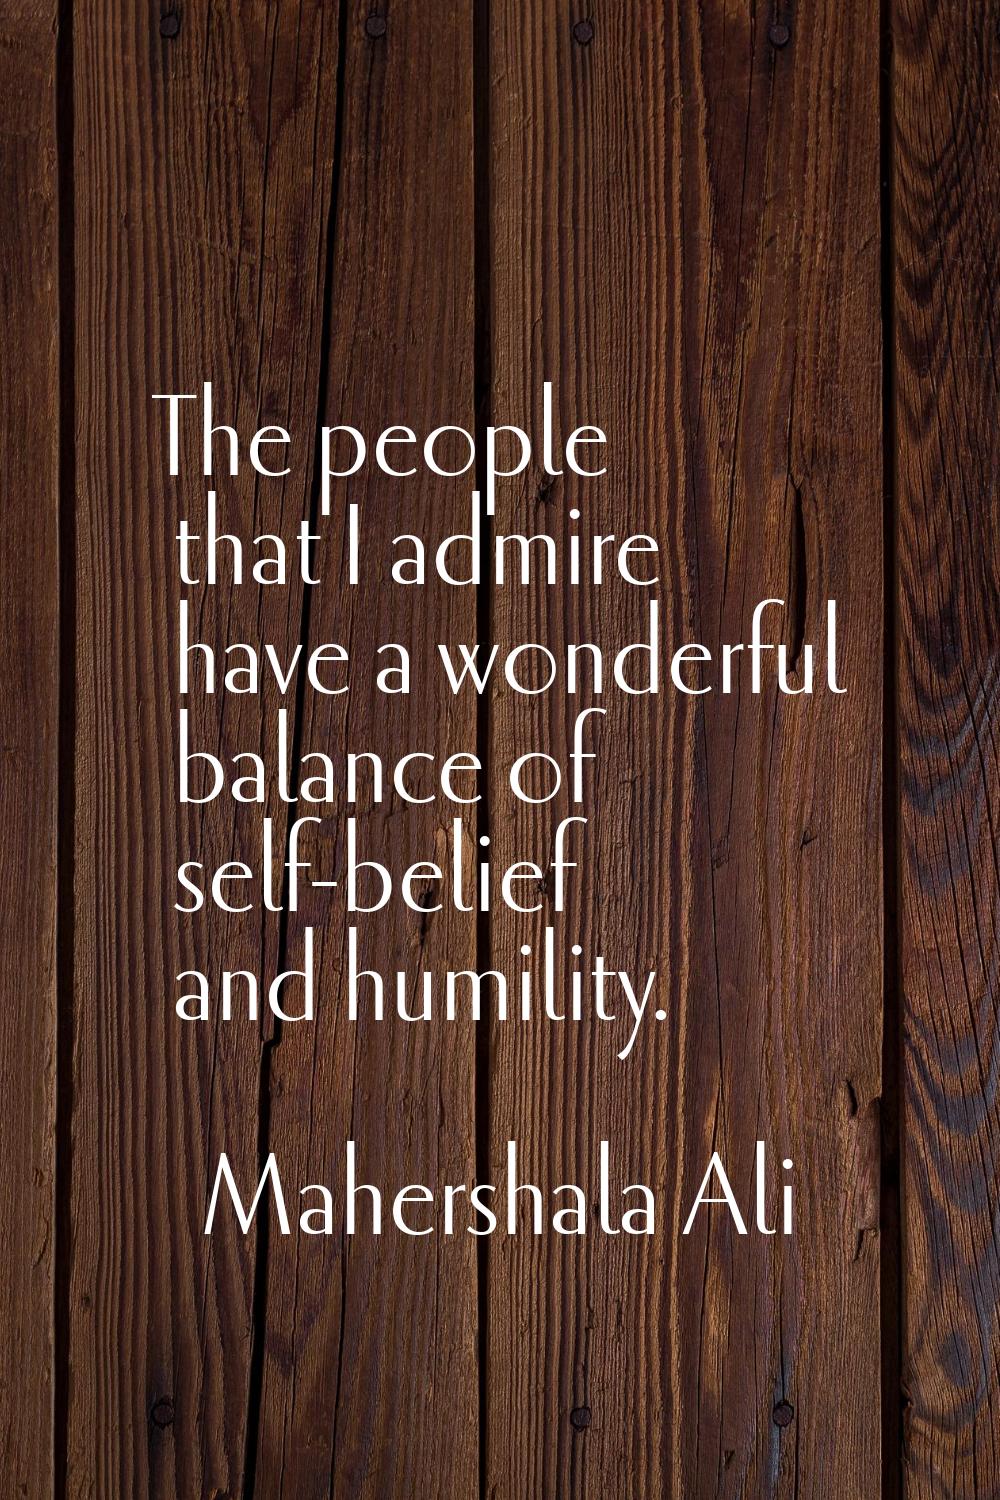 The people that I admire have a wonderful balance of self-belief and humility.